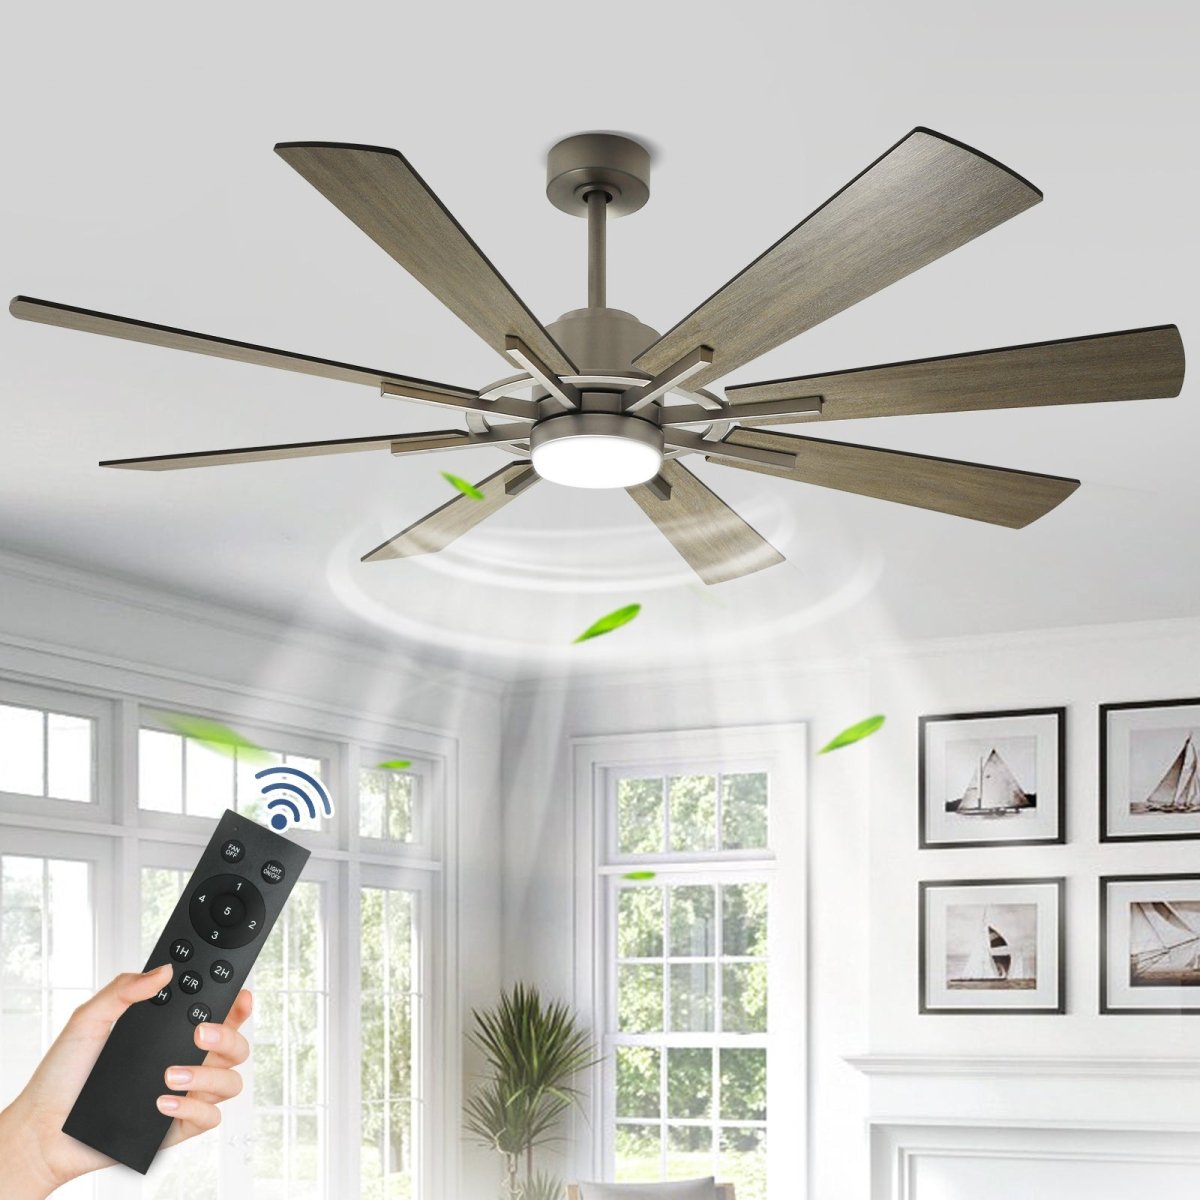 Depuley Ceiling Fan with Lights, 60" Reversible Large Industrial Ceiling fan with 8 Plywood Blades, 3 Light Colors Fandelier Ceiling Fans with Remote for Indoor and Covered Outdoor, 5-Speed Timer Gray - WS-FPZ44-18C-GR 1 | DEPULEY